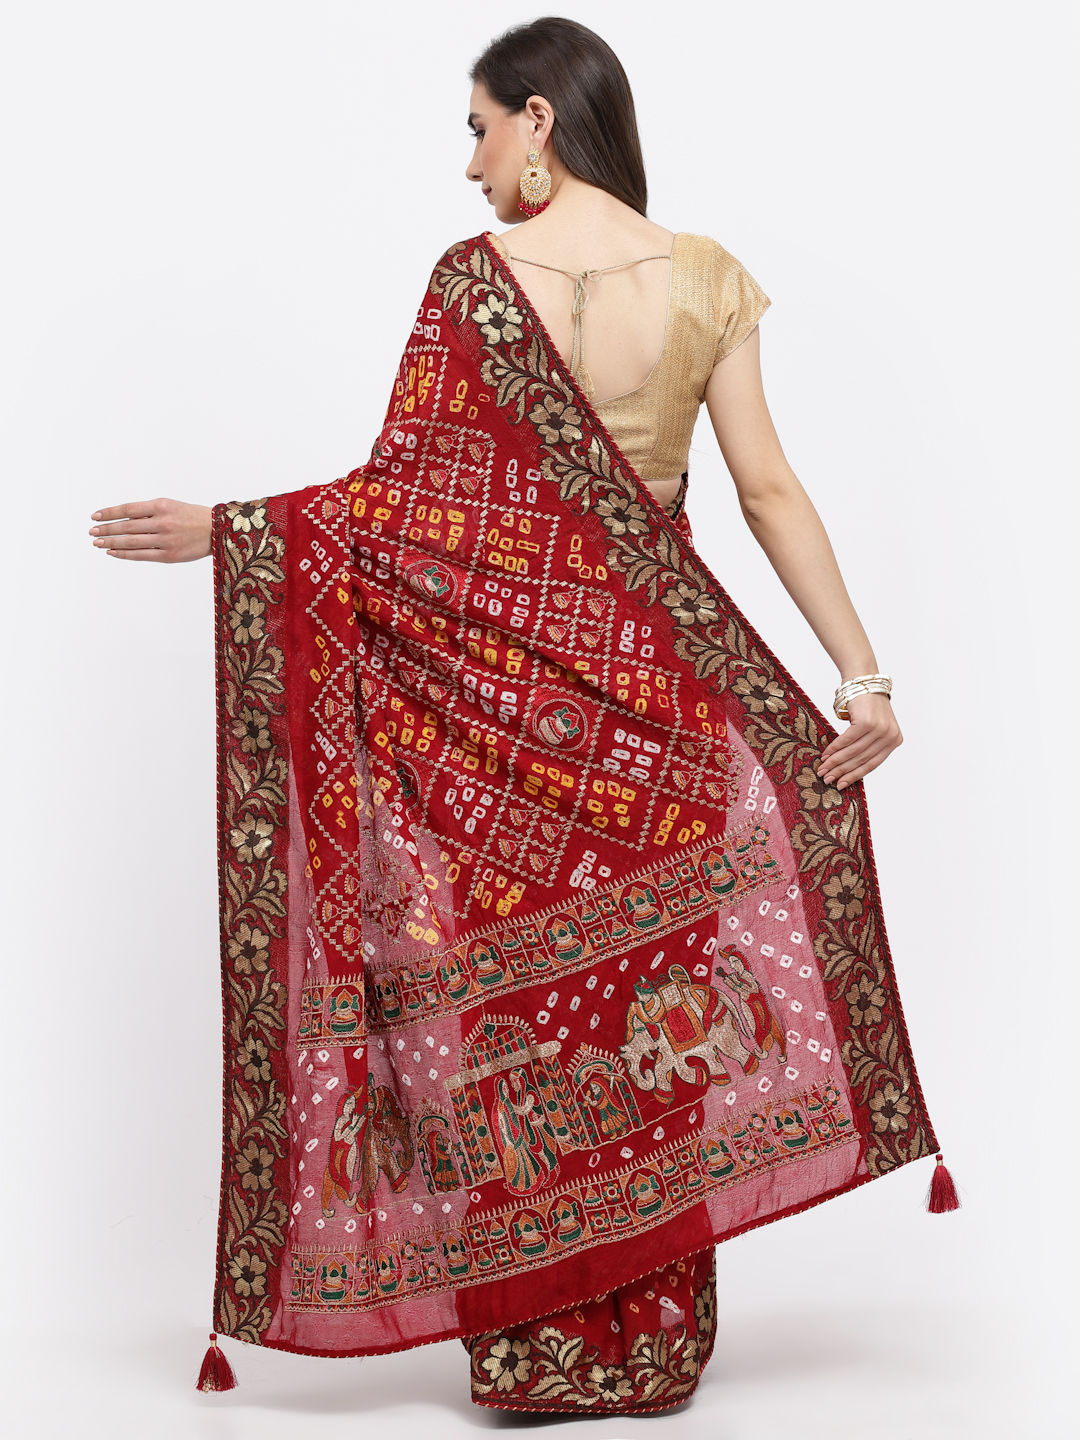 Women Bandhani With Embroidery And Zari Weaving Silk Saree And Blouse Maroon